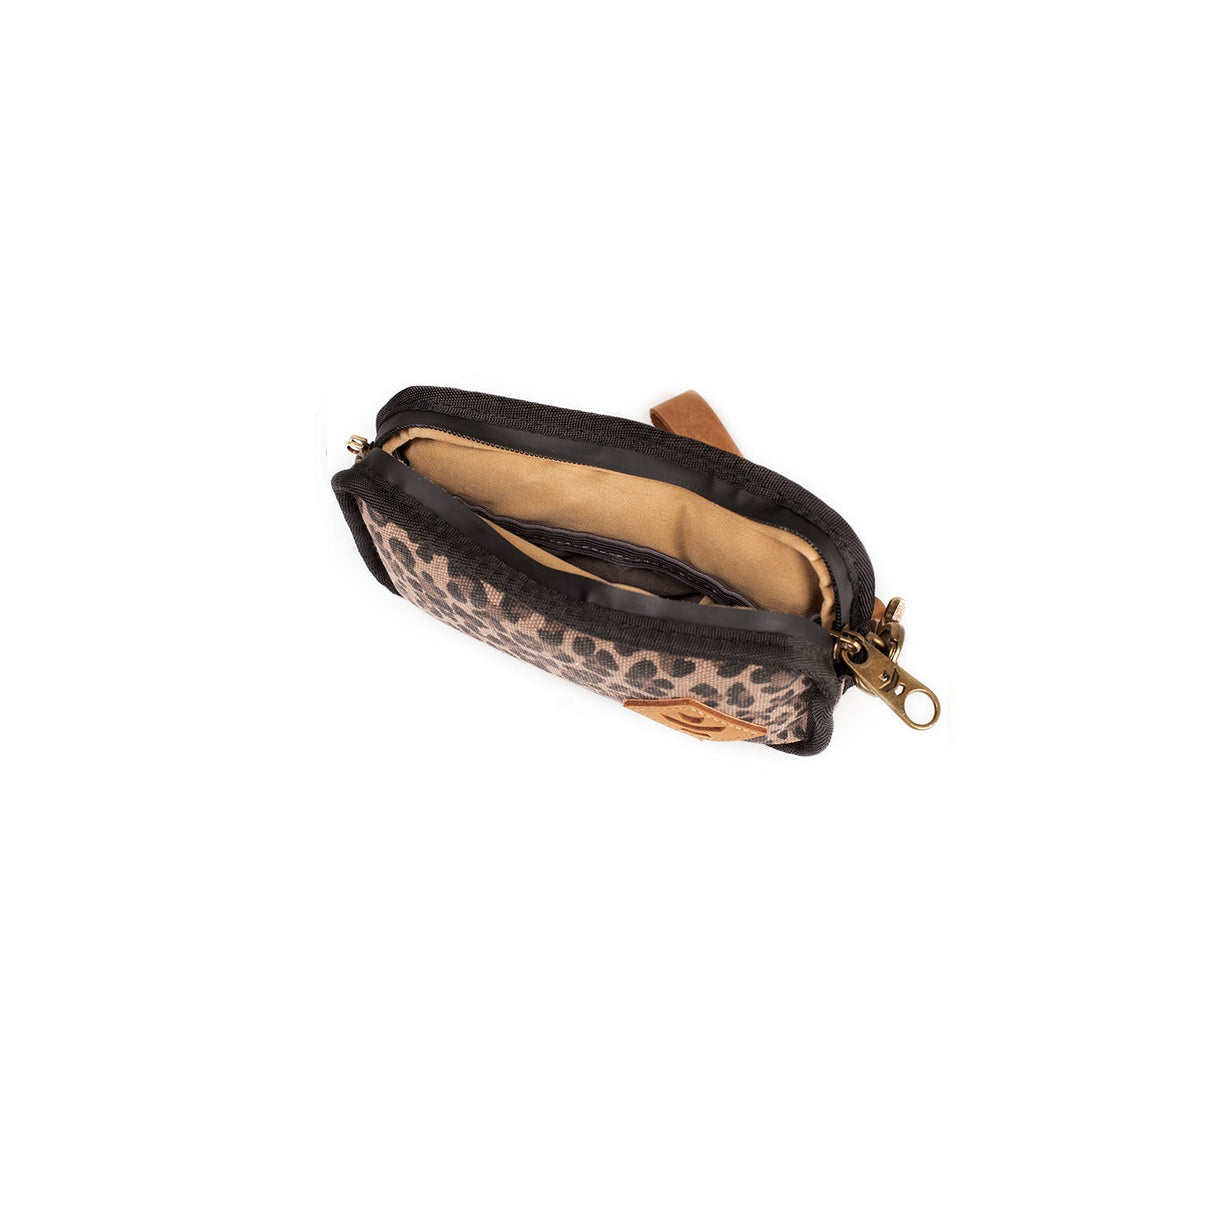 Revelry Supply 'The Gordito' - Smell Proof Padded Pouch with Leopard Print, Side View